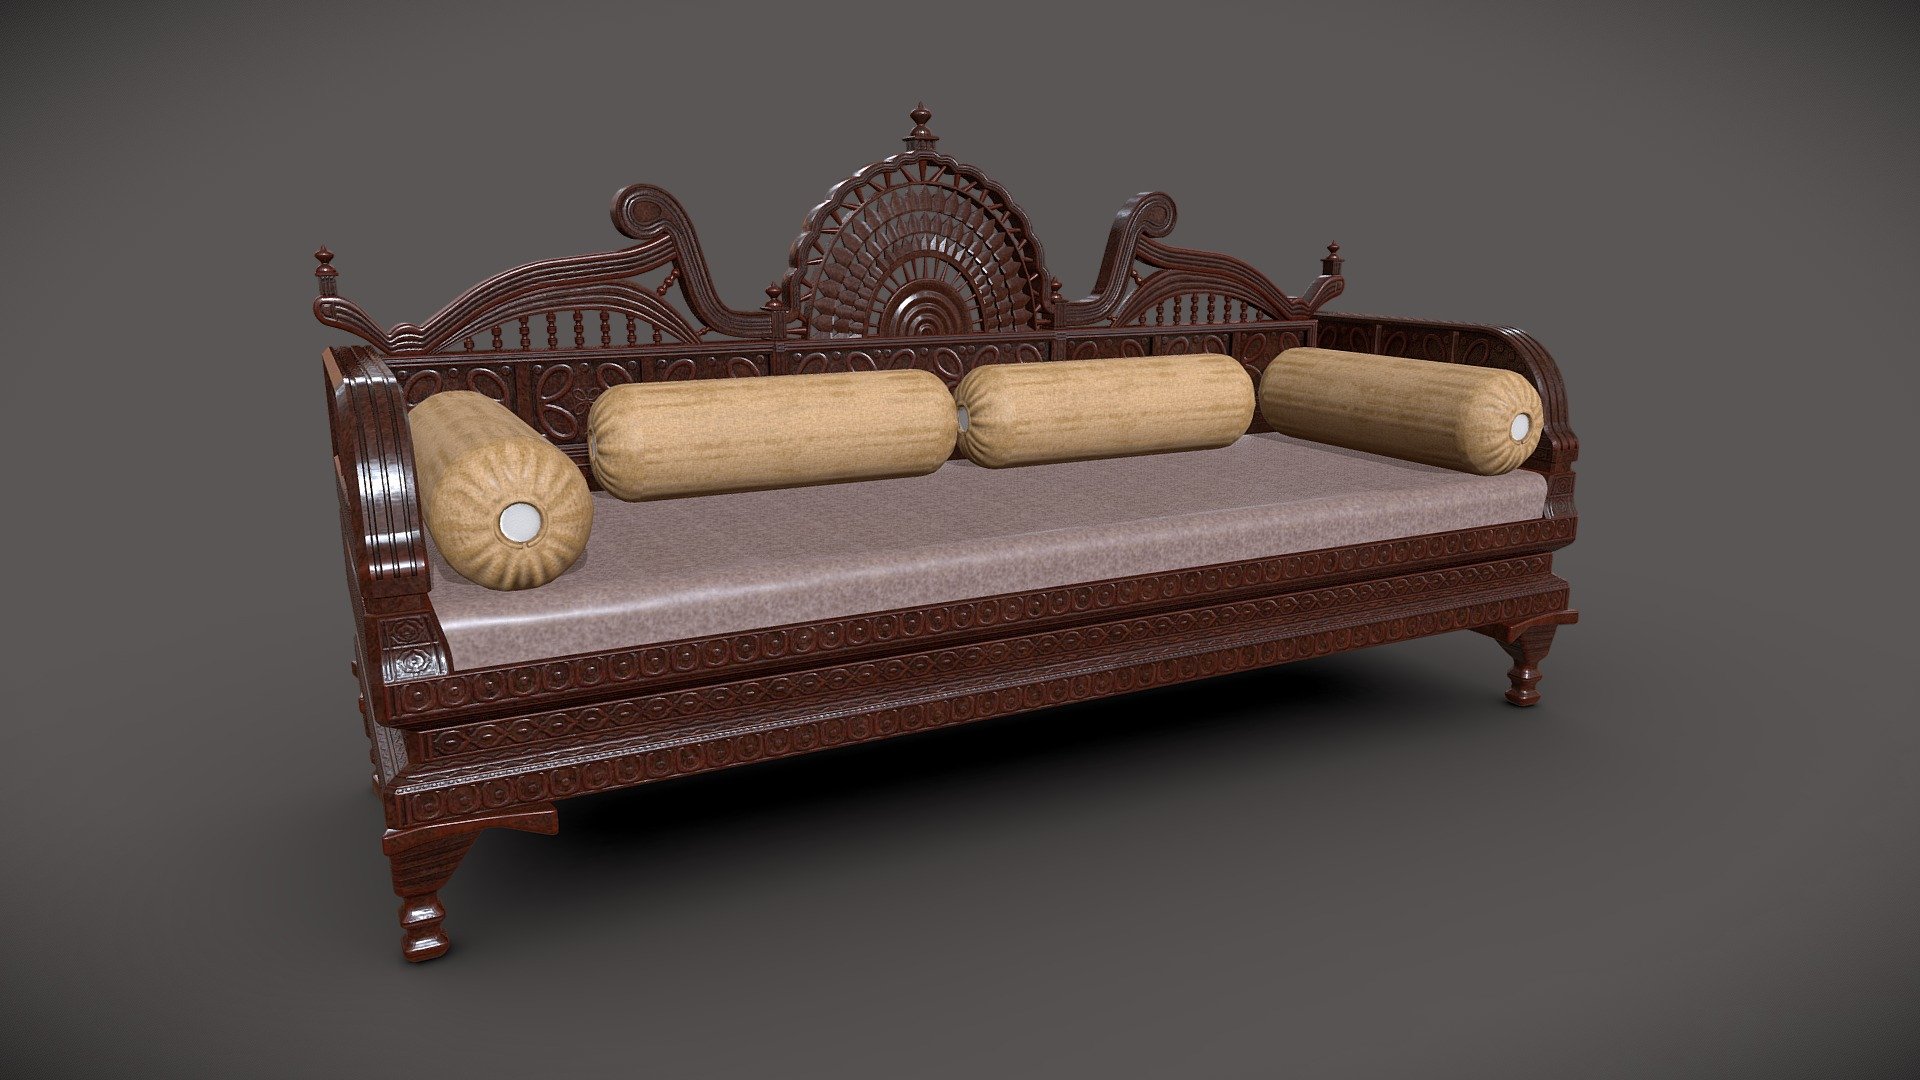 Royal Sofa for elites.
This sofa is made for emperors and kings but normal peasants can also use it though its not recommended.
The pack contains -
1. FBX file
2. Textures ((4k and 2k resolution)
Stay royal :) - Royal Sofa - Buy Royalty Free 3D model by NeowLite 3d model